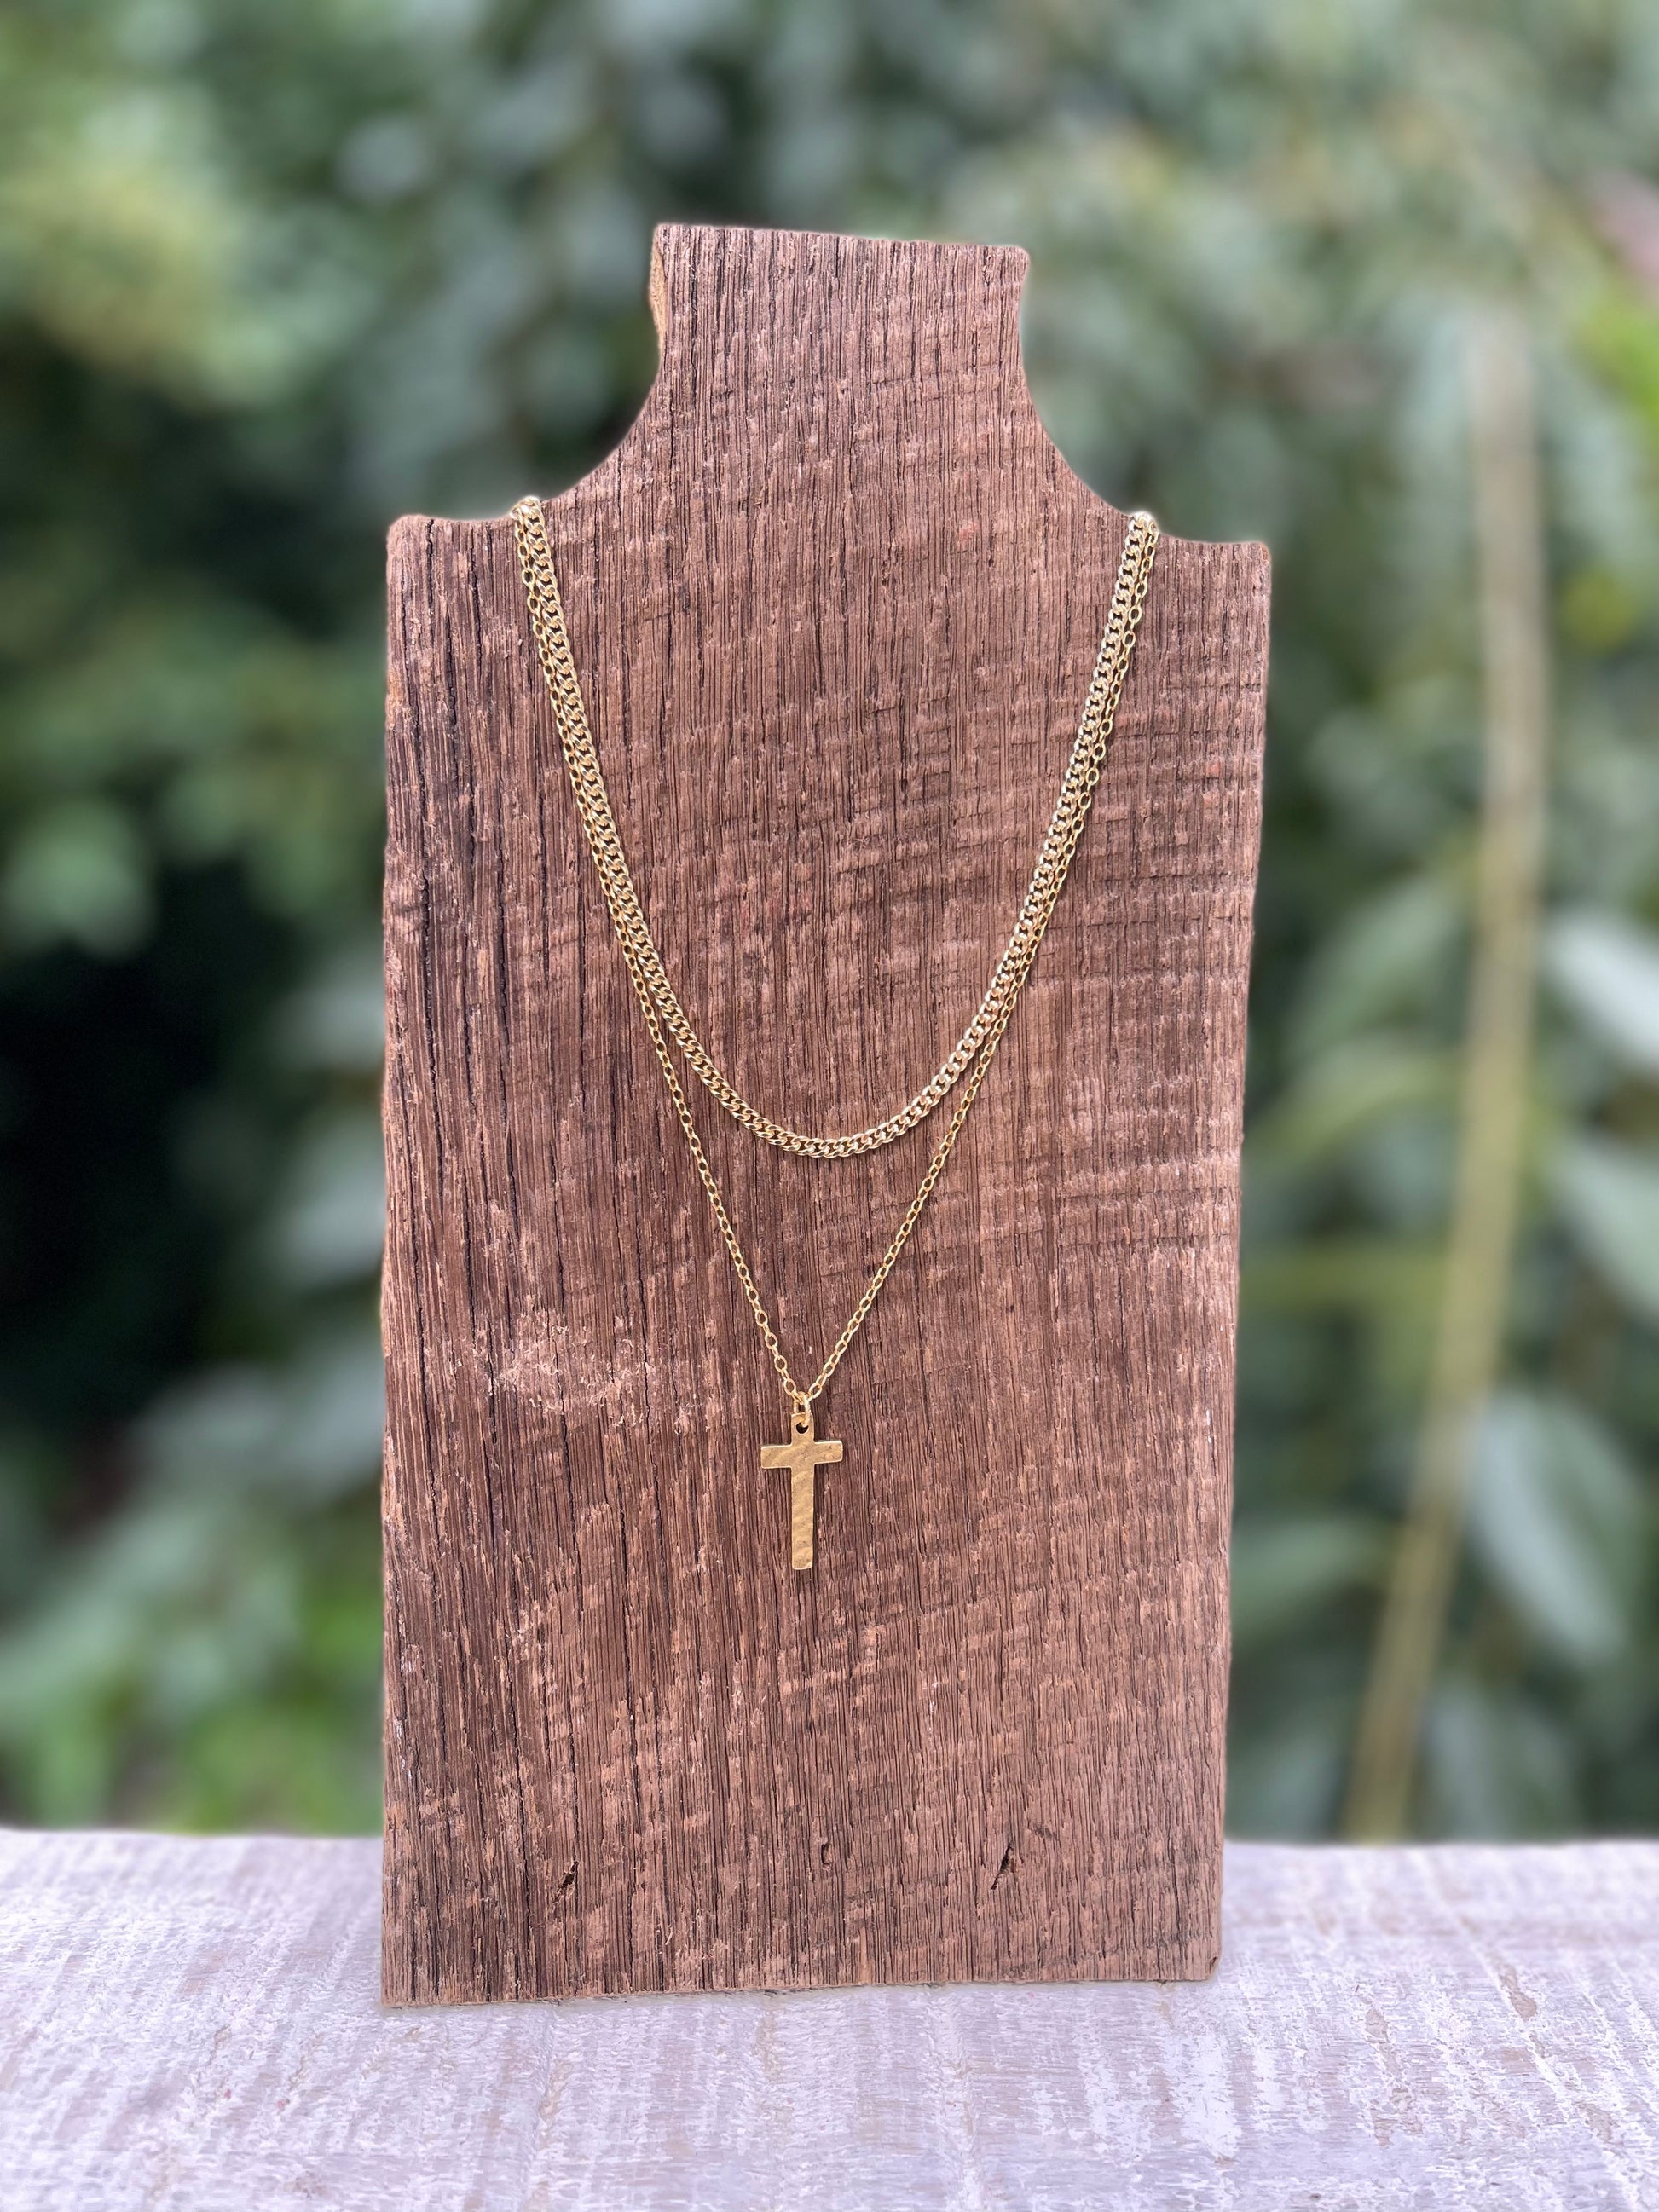 Rustic Cross Necklace | Layering Necklace